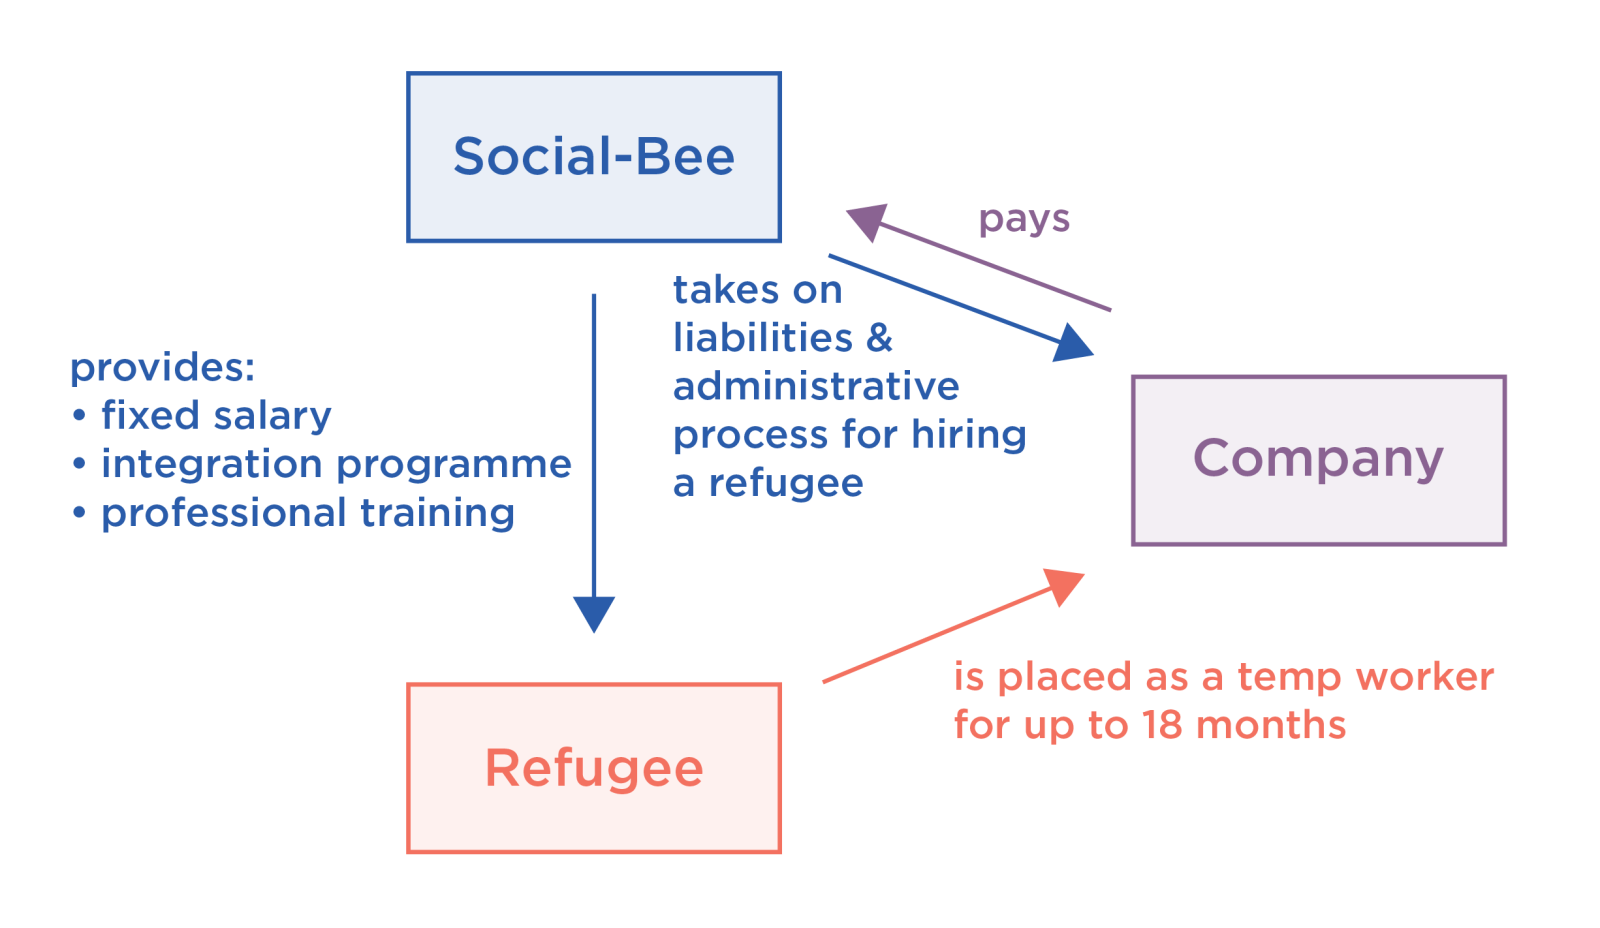 Social-Bee's Business model graph